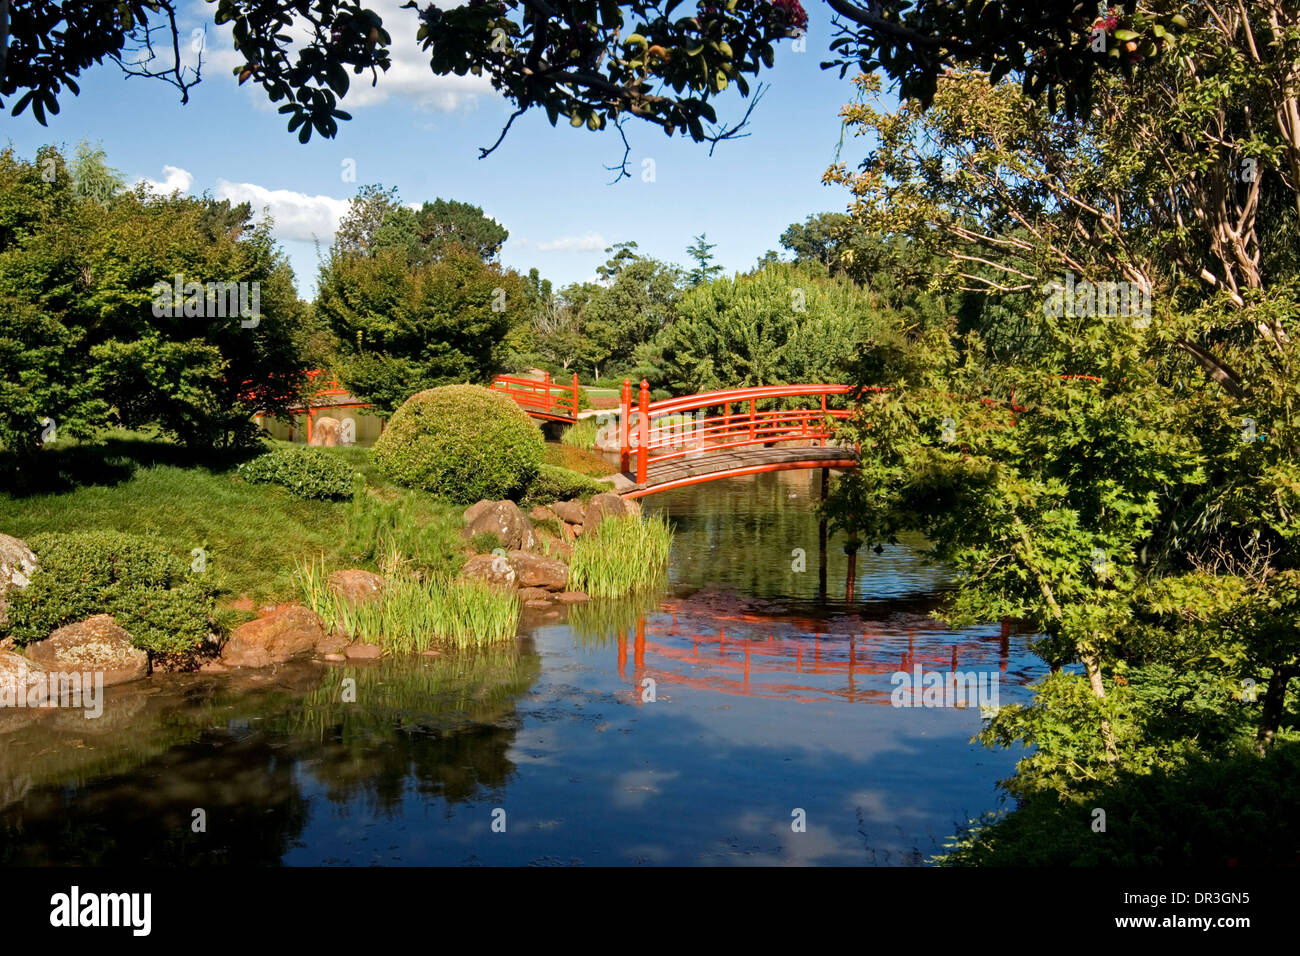 Lush vegetation trees and shrubs with red arched bridge reflected in blue water of lake at Japanese Gardens Toowoomba Queensland Stock Photo